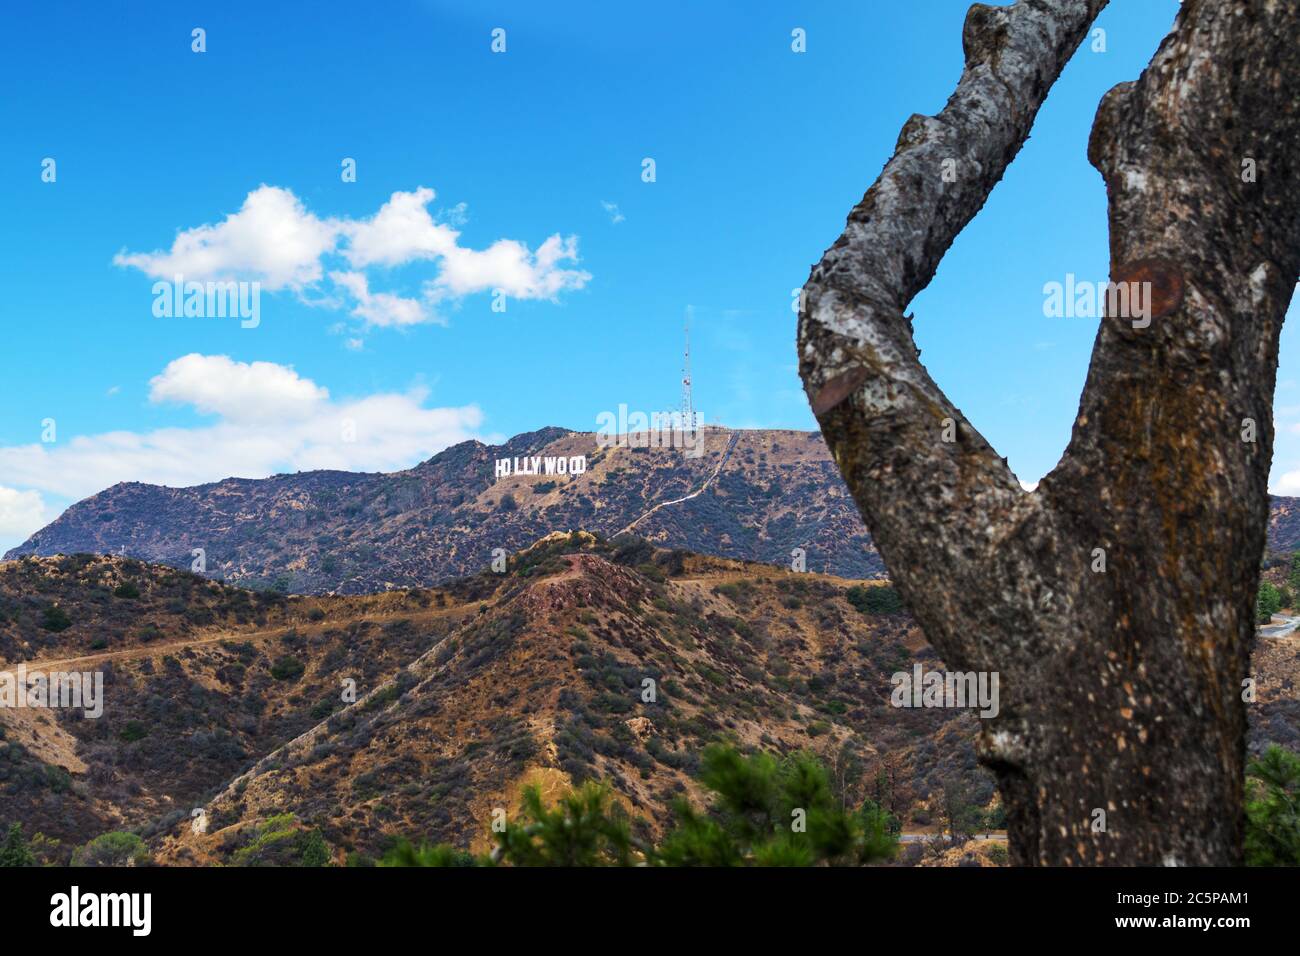 LOS ANGELES, CALIFORNIA - OCTOBER 27, 2016: Hollywood sign under a blue sky with clouds, California Stock Photo